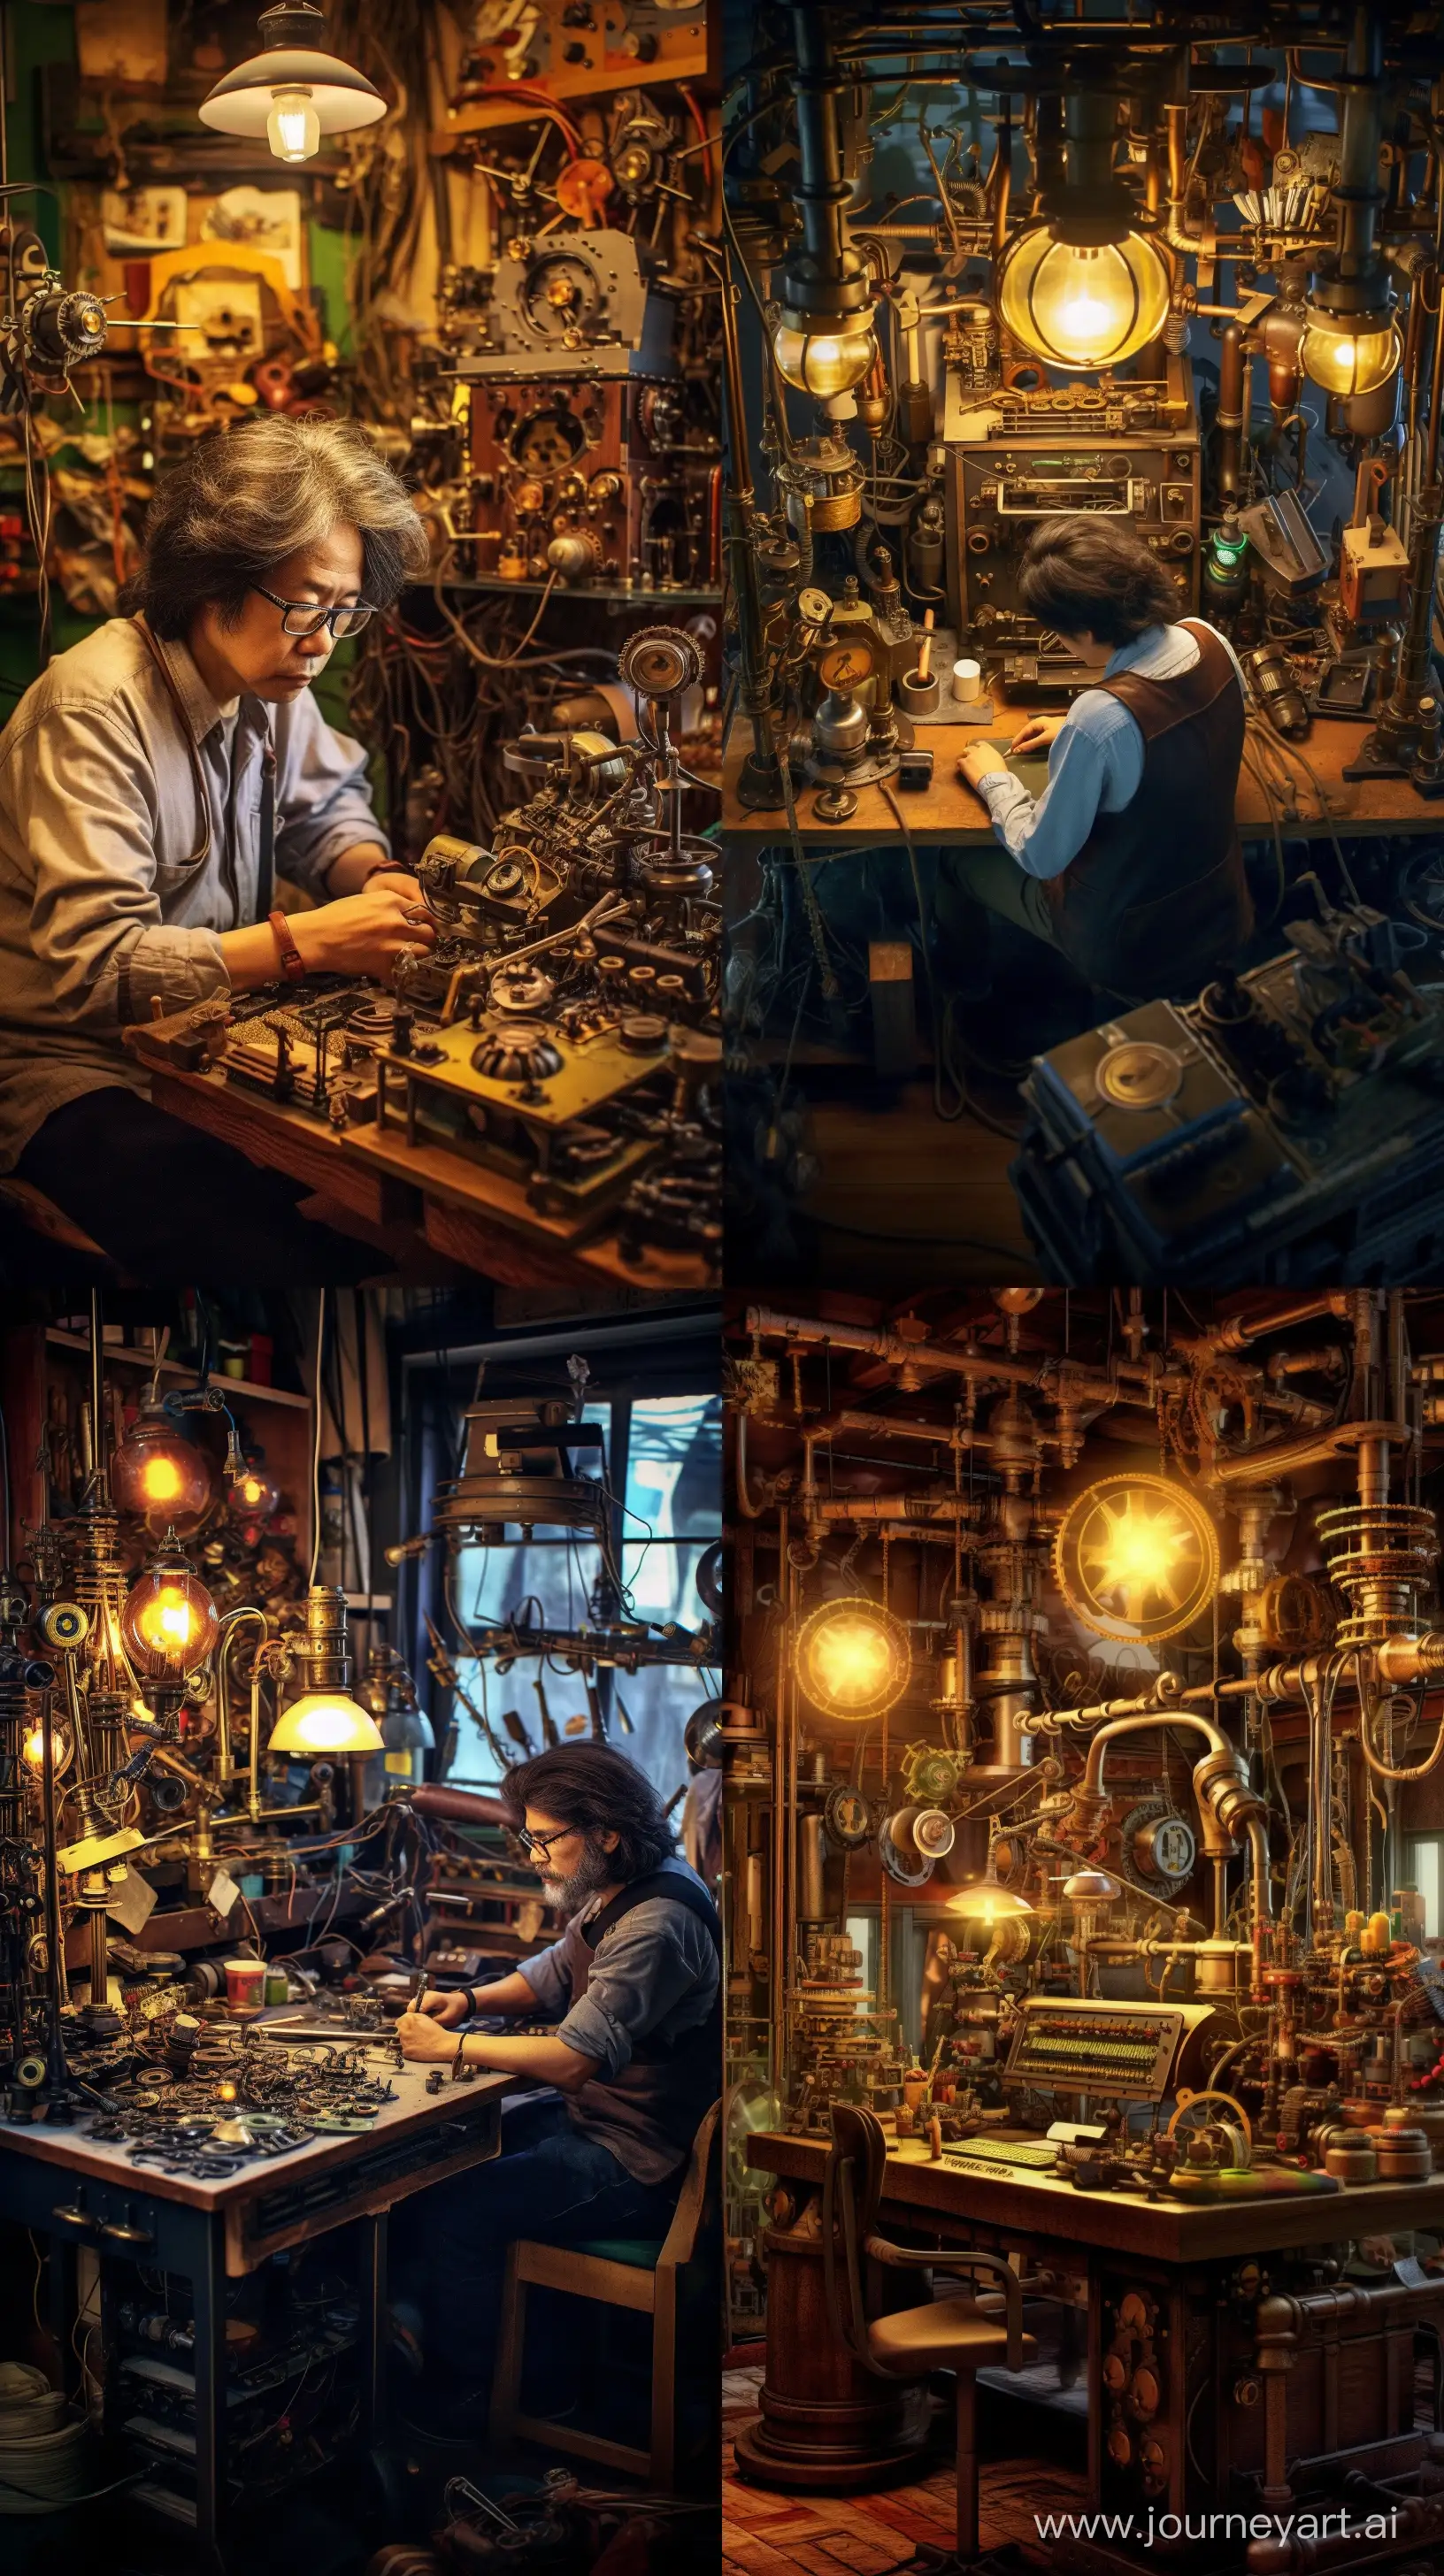 A steampunk inventor's workshop with a website development machine, medium: digital art, style: akin to the works of Kazuhiko Nakamura, lighting: artificial gas lamps, colors: dark wood and metallics, composition: Sony α1, FE 50mm F1.2 GM lens, ISO 200, f/4, shutter speed 1/60, prime lens --ar 9:16 --v 5.1 --style raw --q 2 --s 750